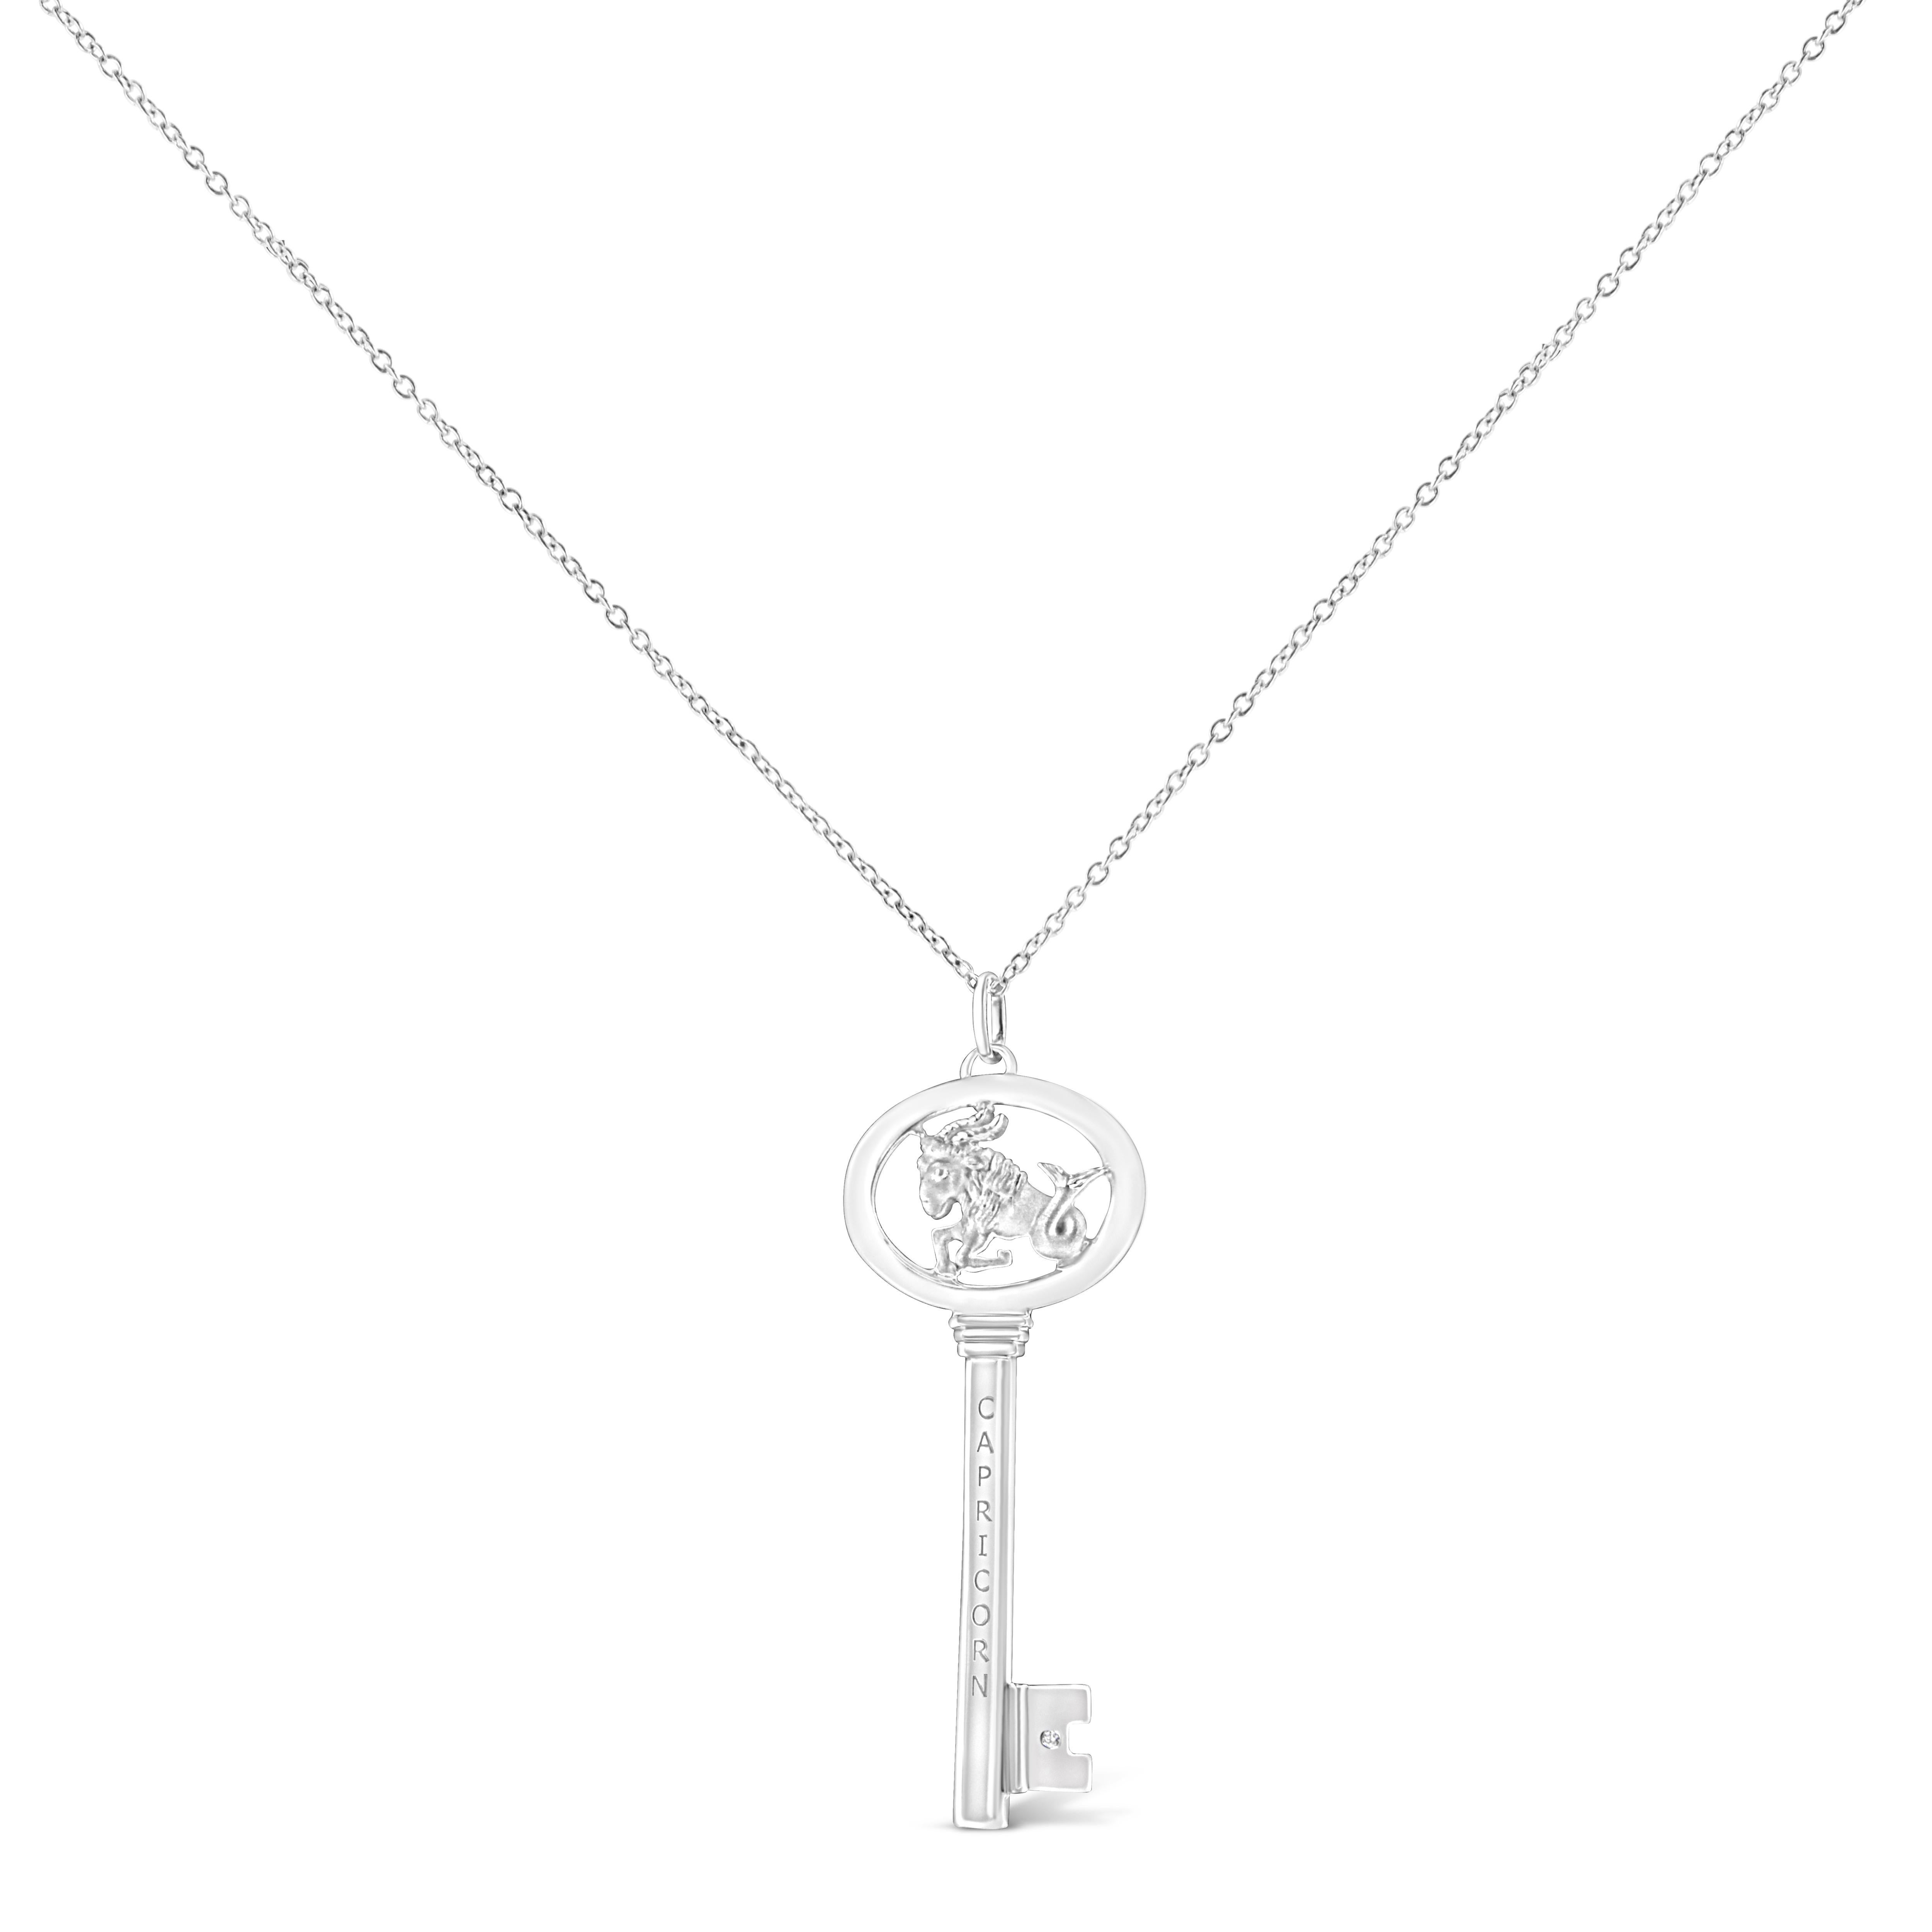 It's as if the stars aligned to create this stunning .925 Sterling Silver necklace flaunting a Capricorn zodiac pendant accented by a glimmering bezel set natural diamond. Brilliant beacons of optimism and hope, our Zodiac Keys are radiant symbols